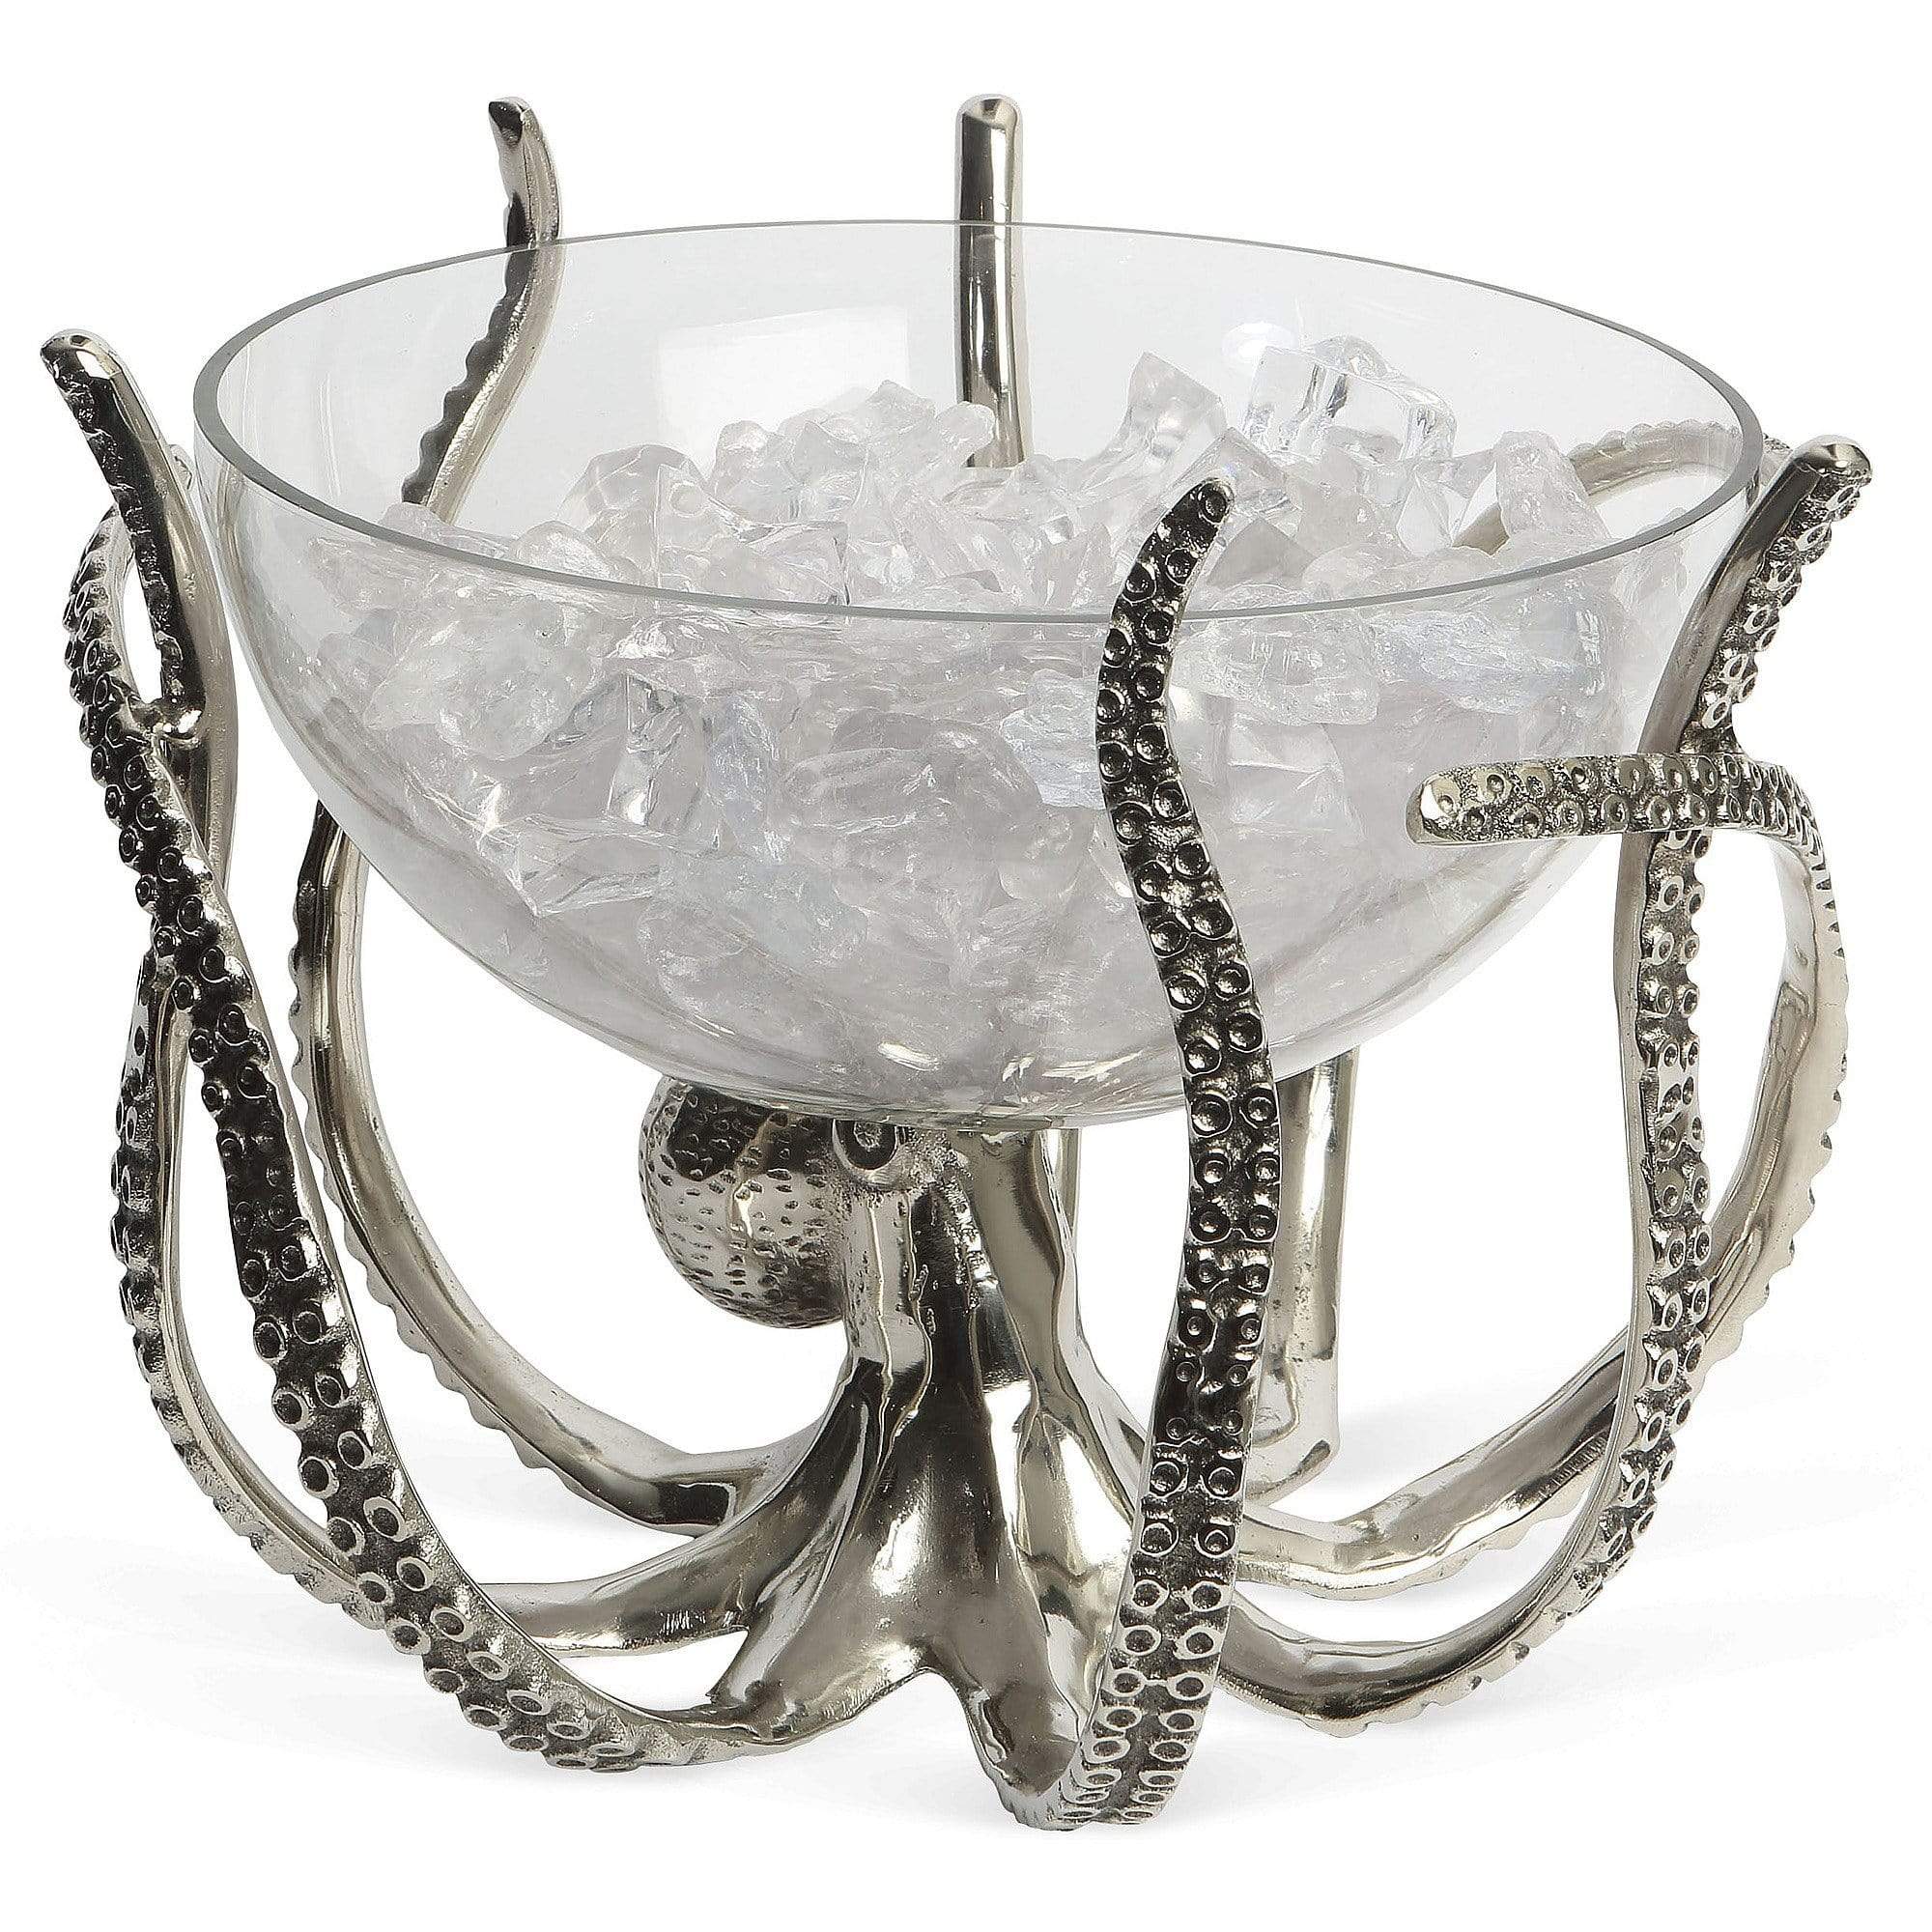 Octopus Stand and Glass Bowl